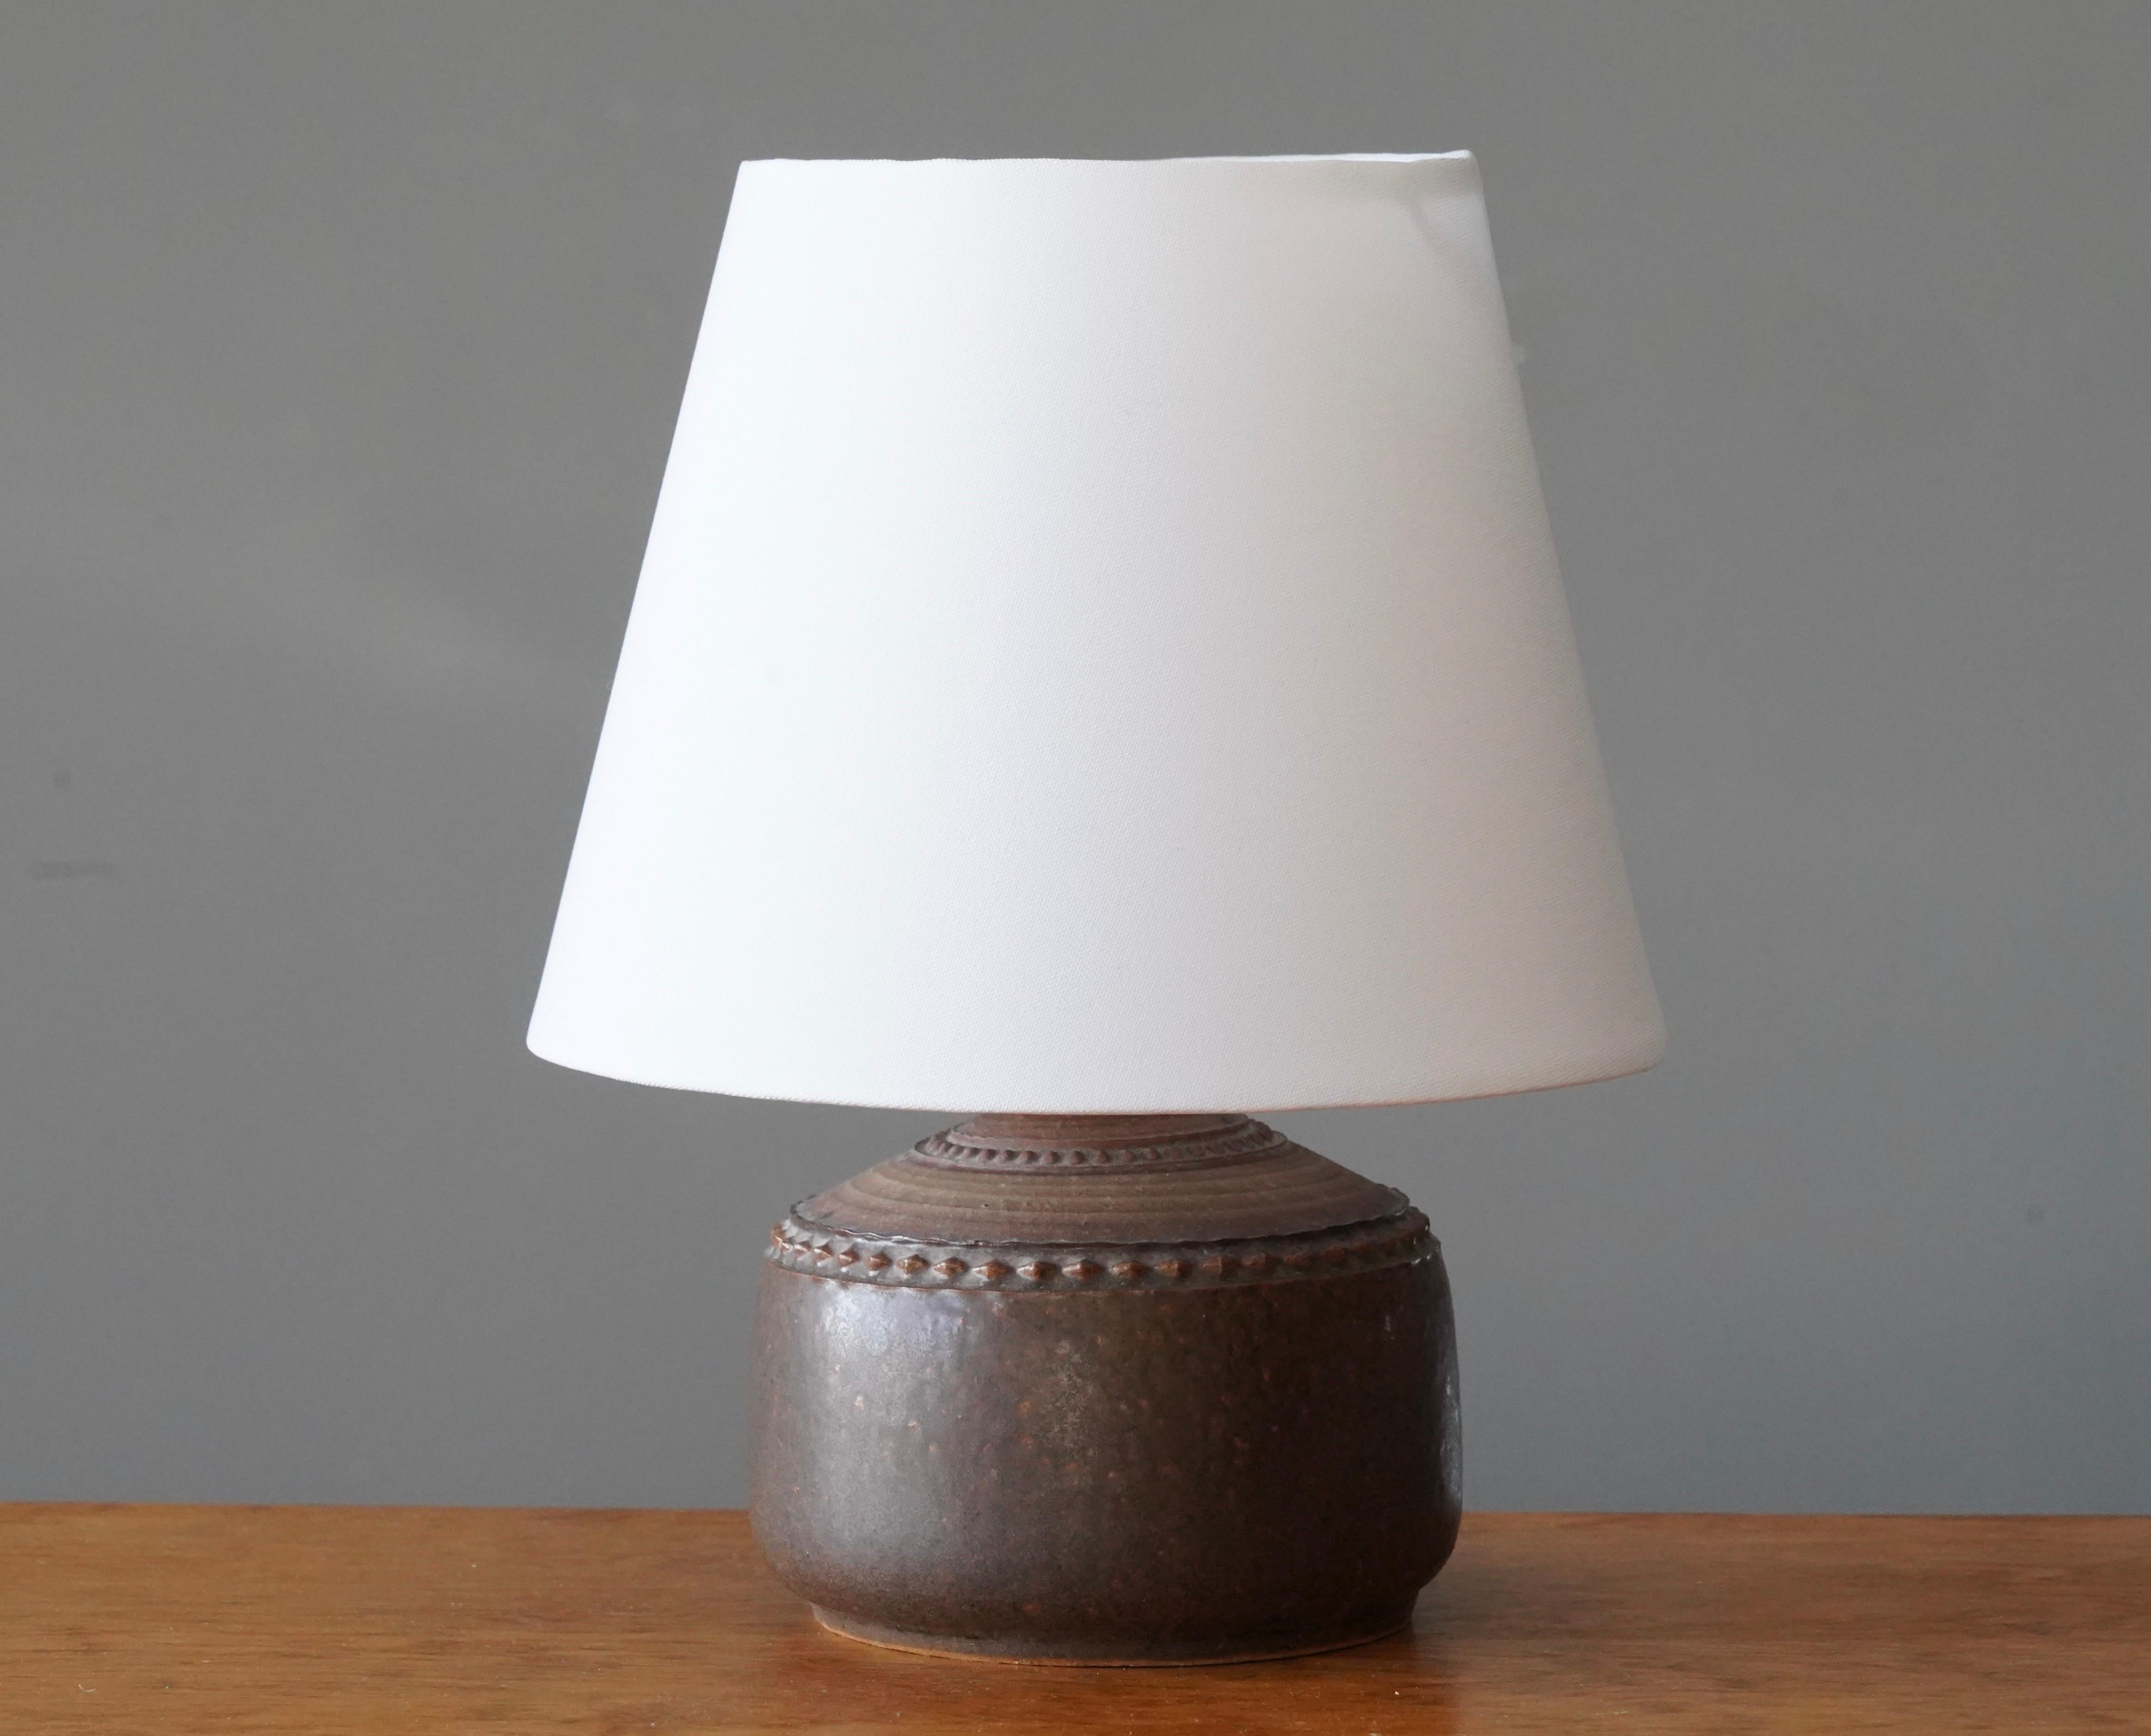 A table lamp by Klase Höganäs. In stoneware with simple incised decor. Signed. 

Dimensions listed are without lampshade. 
Dimensions with shade: height is 10.5 inches, width is 8.25 inches.
Dimensions of shade: top diameter is 5.25 inches,